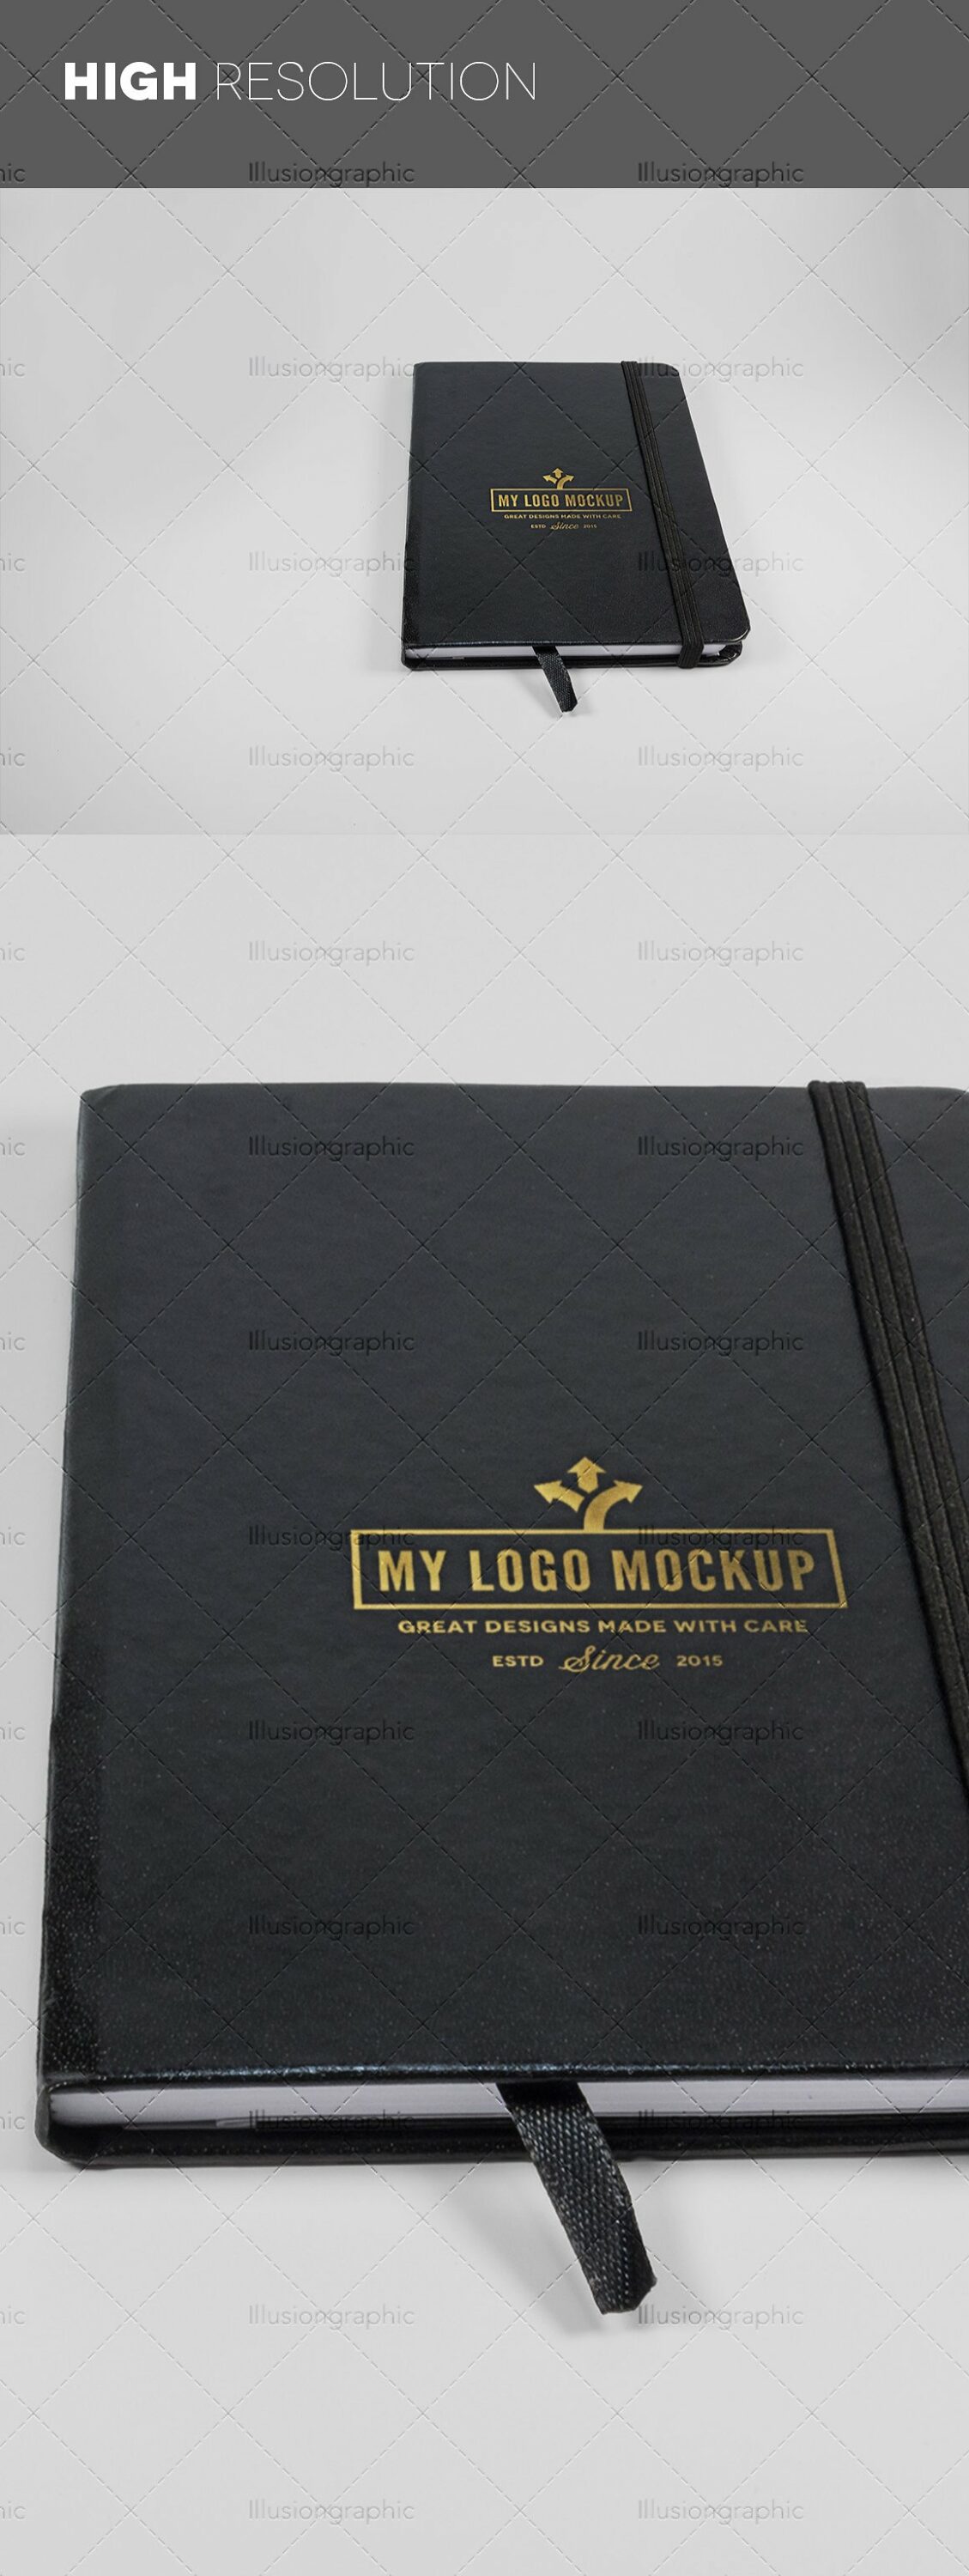 Images of a notepad with a colorful design in black.